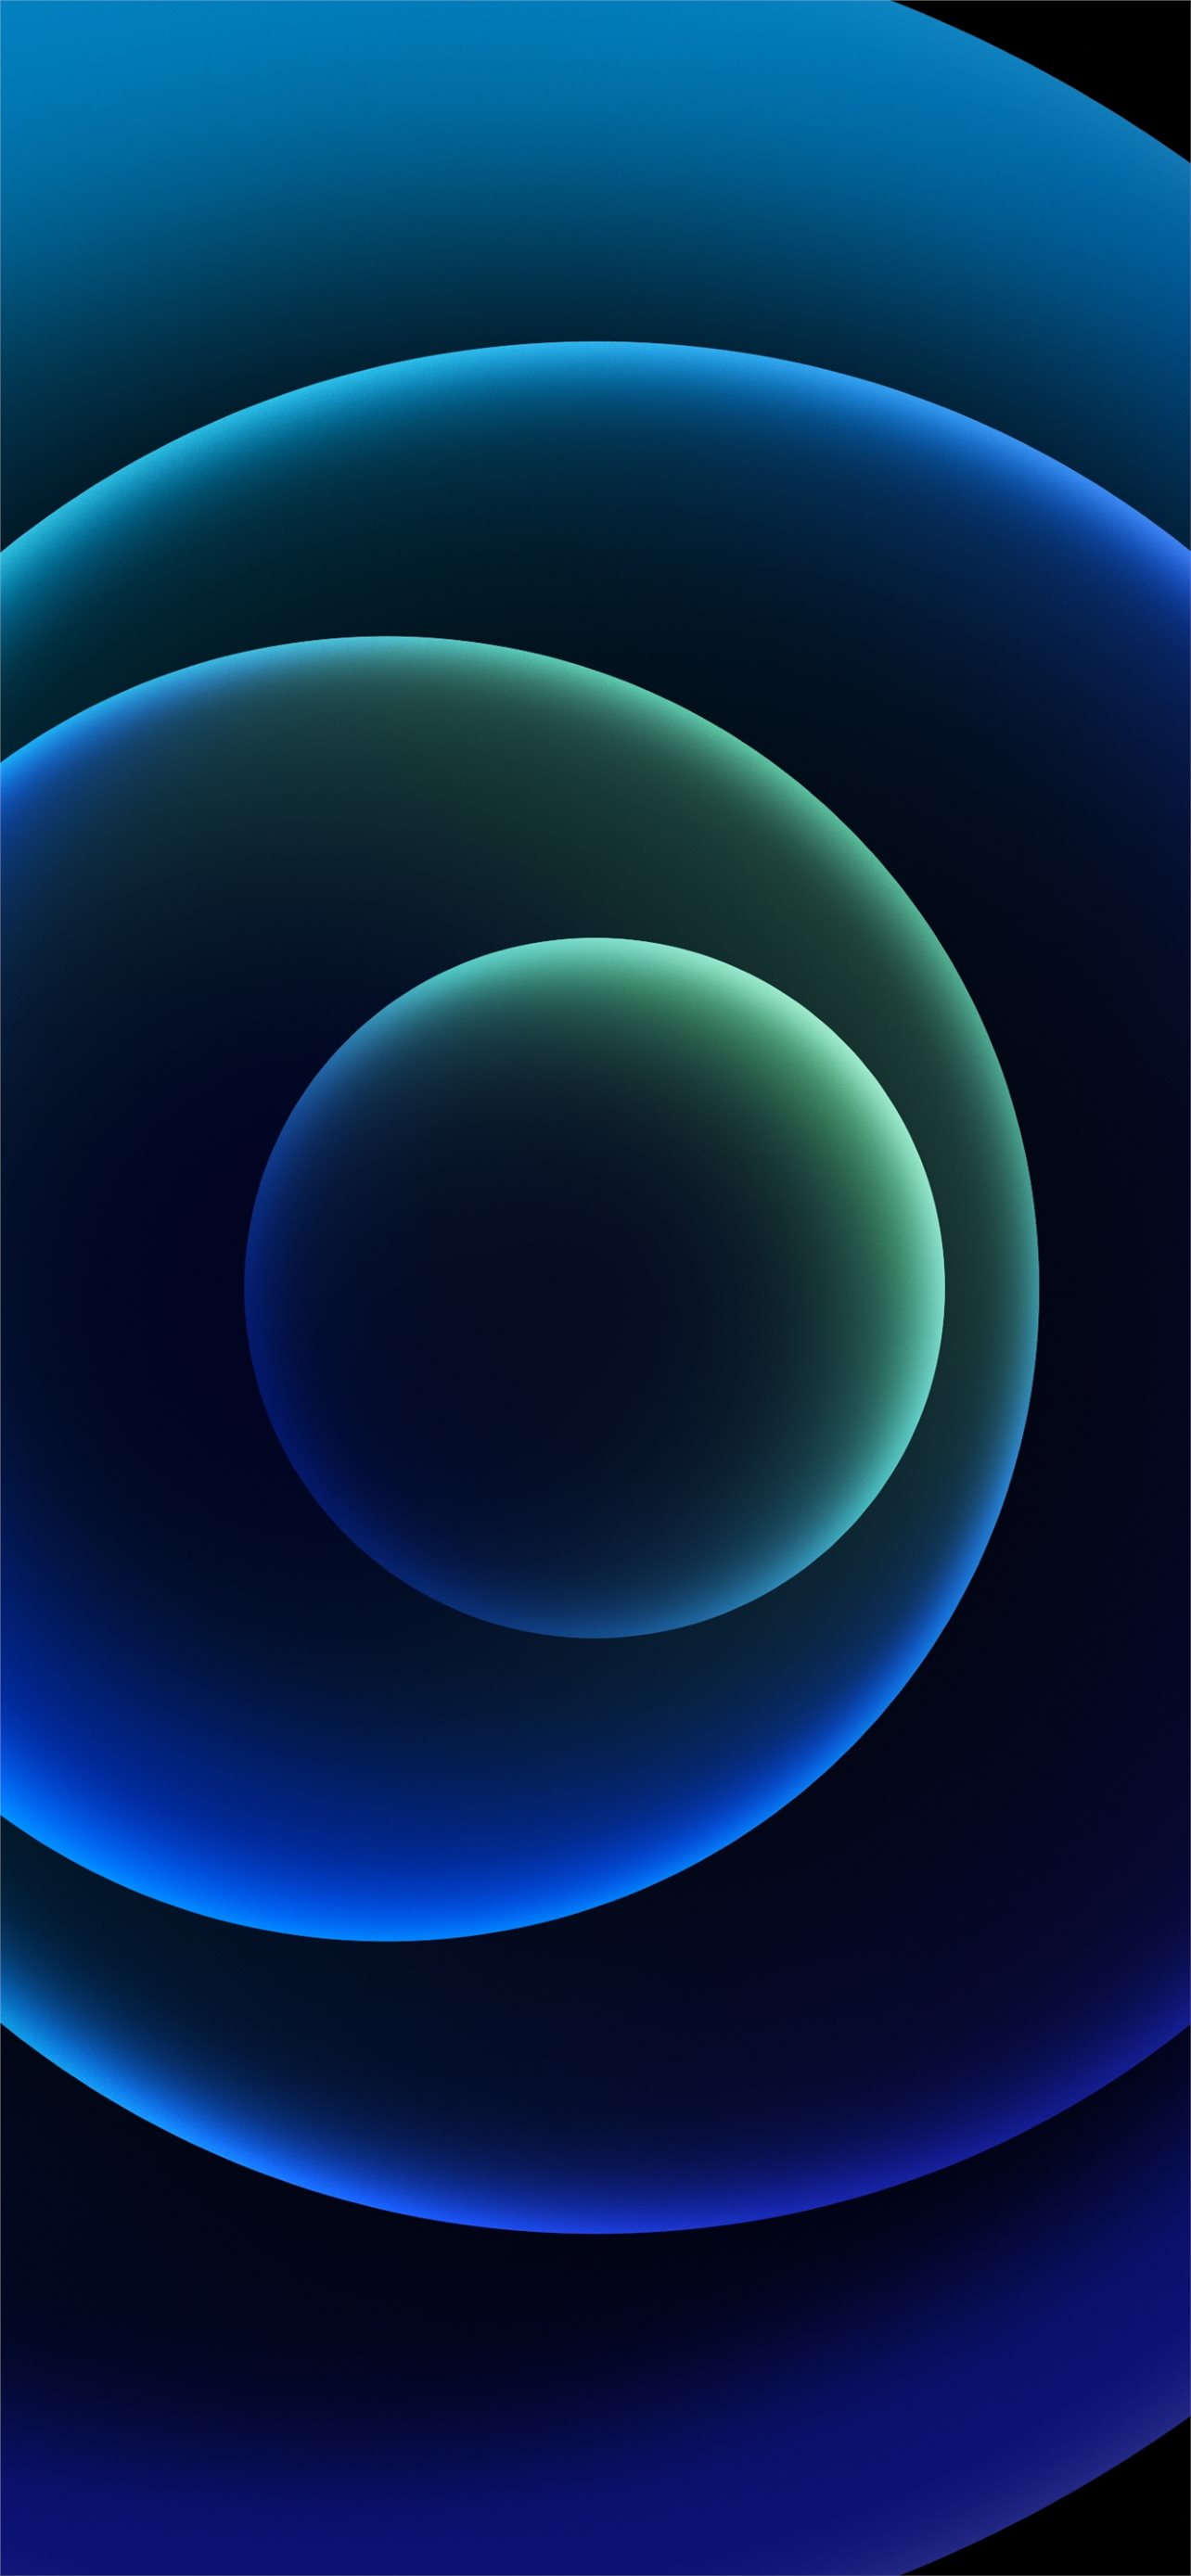 Colorful iPhone 12 Stock wallpaper Orbs Blue Dark iPhone Wallpapers ...